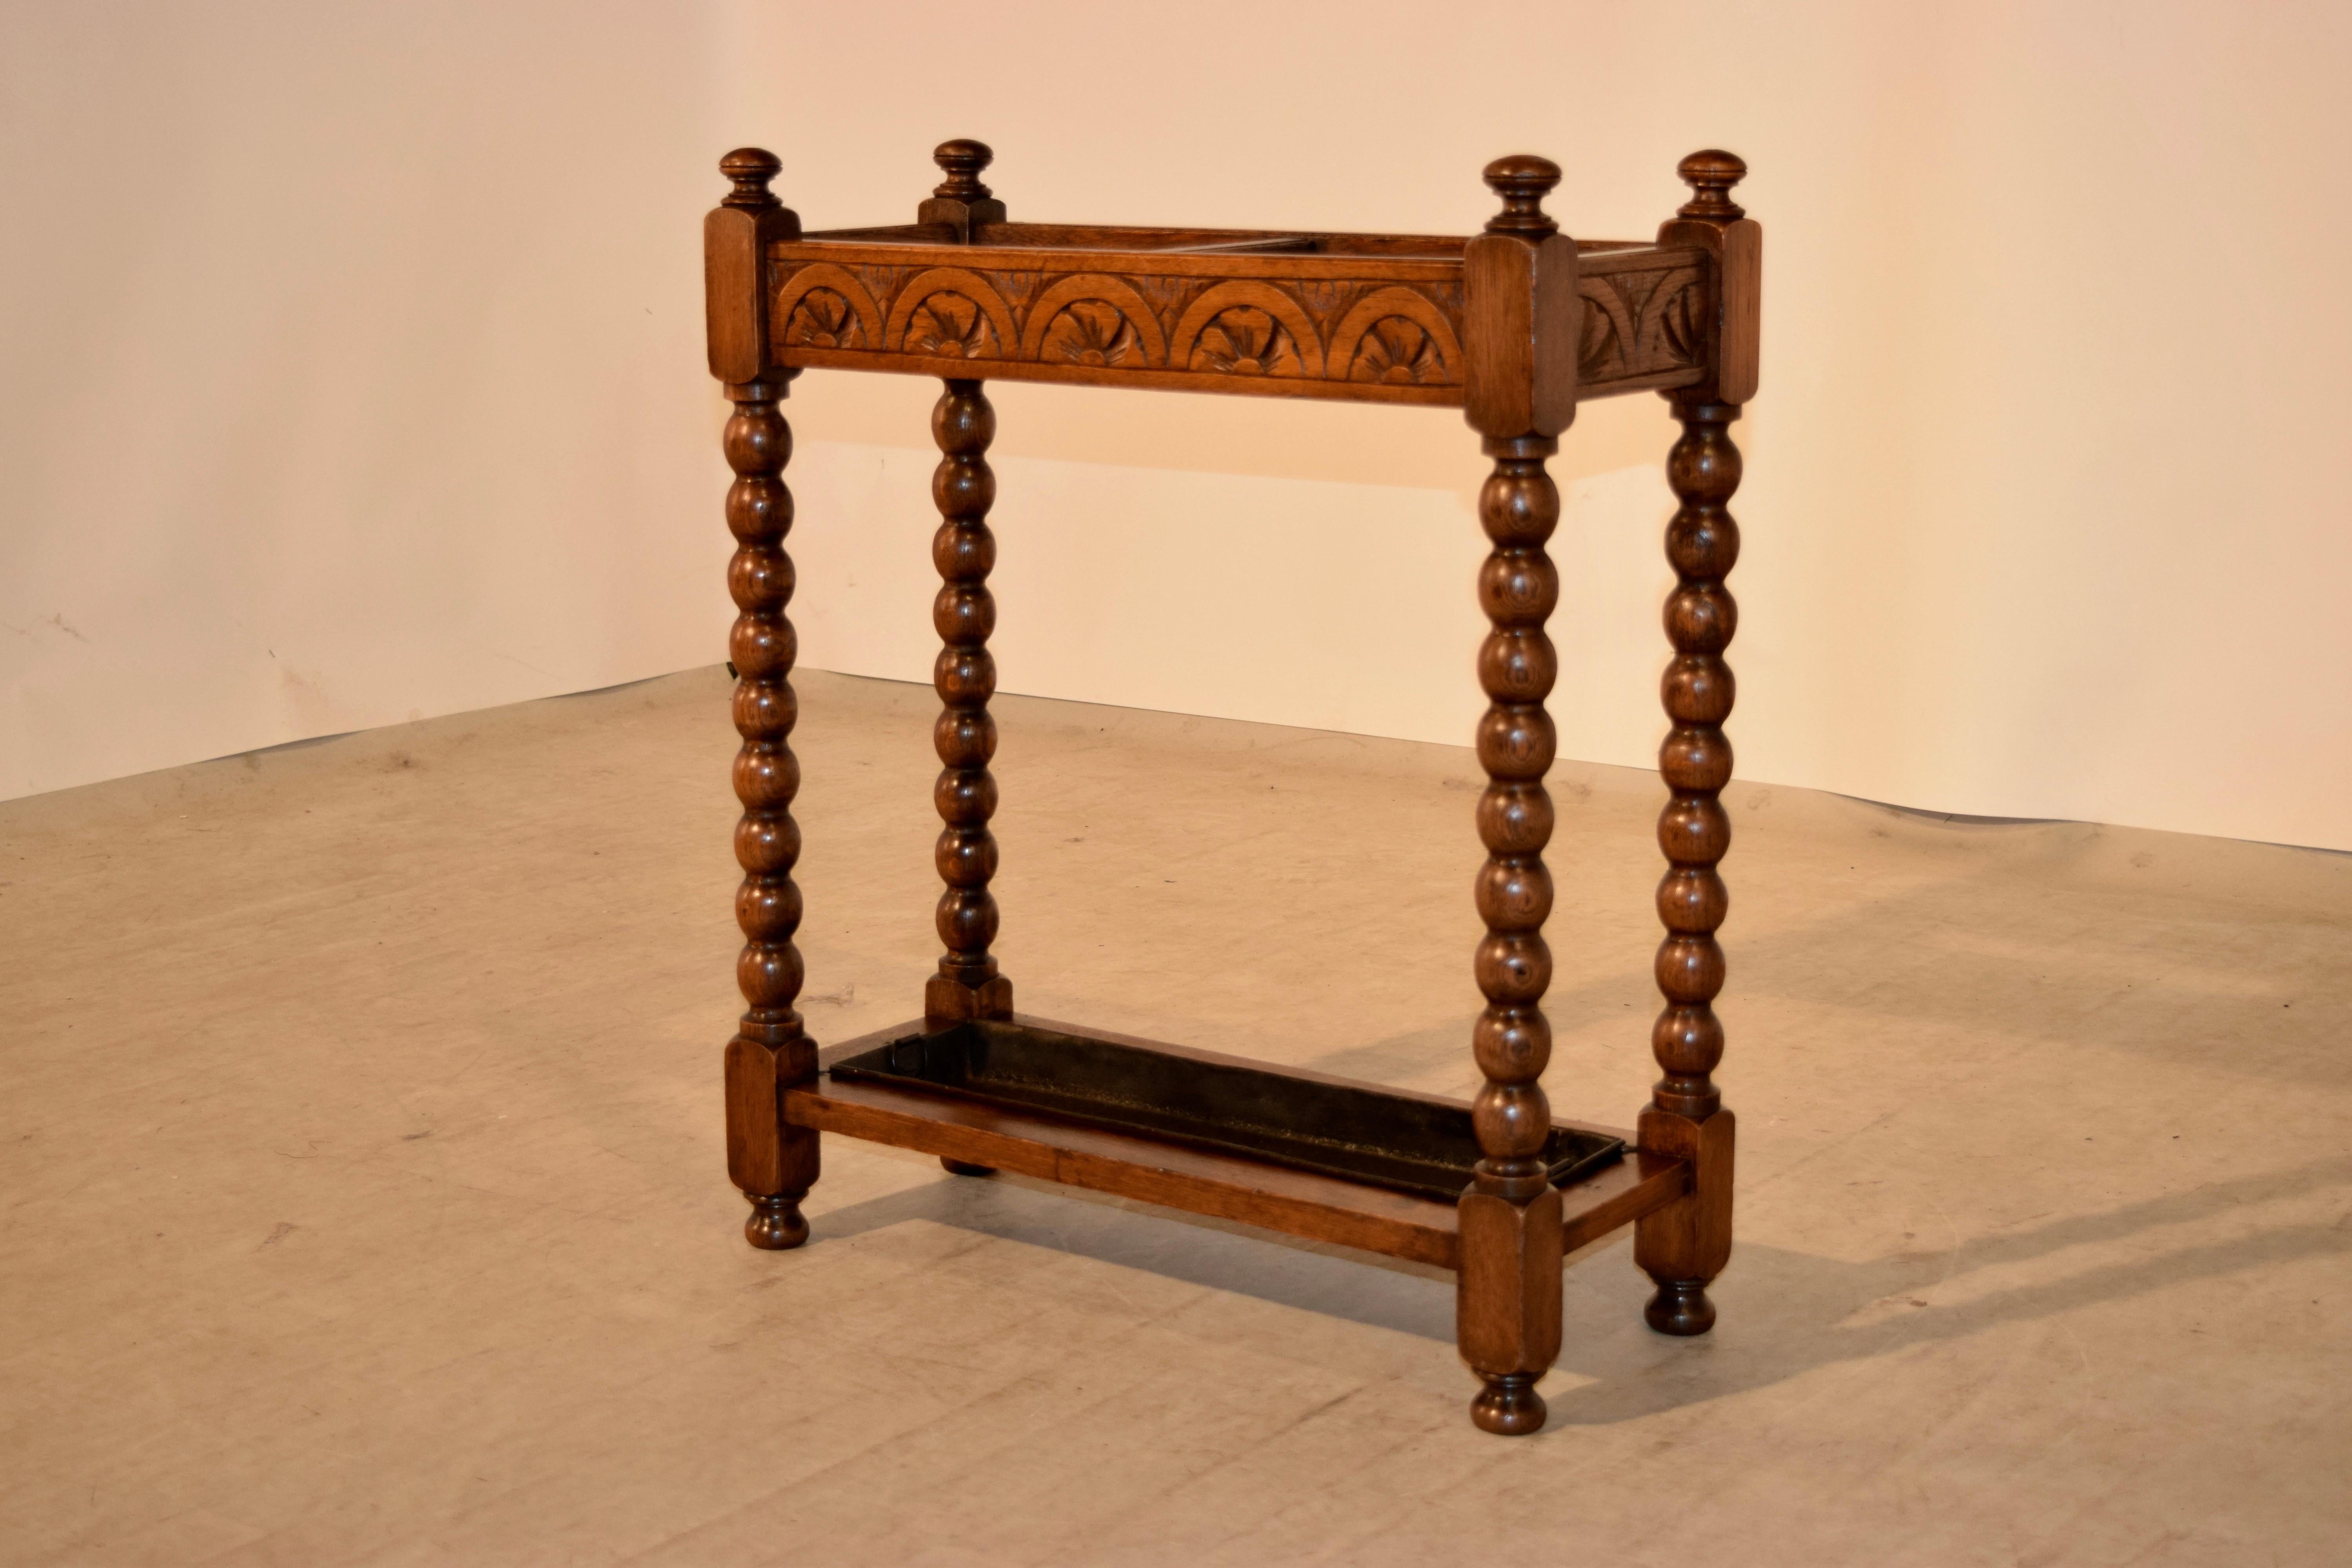 Late 19th century oak umbrella stand from England with hand-carved decorated top rail, joined by hand-turned spool legs, which are joined at the bottom by simple stretchers with a metal drip tray. Supported on hand-turned feet.